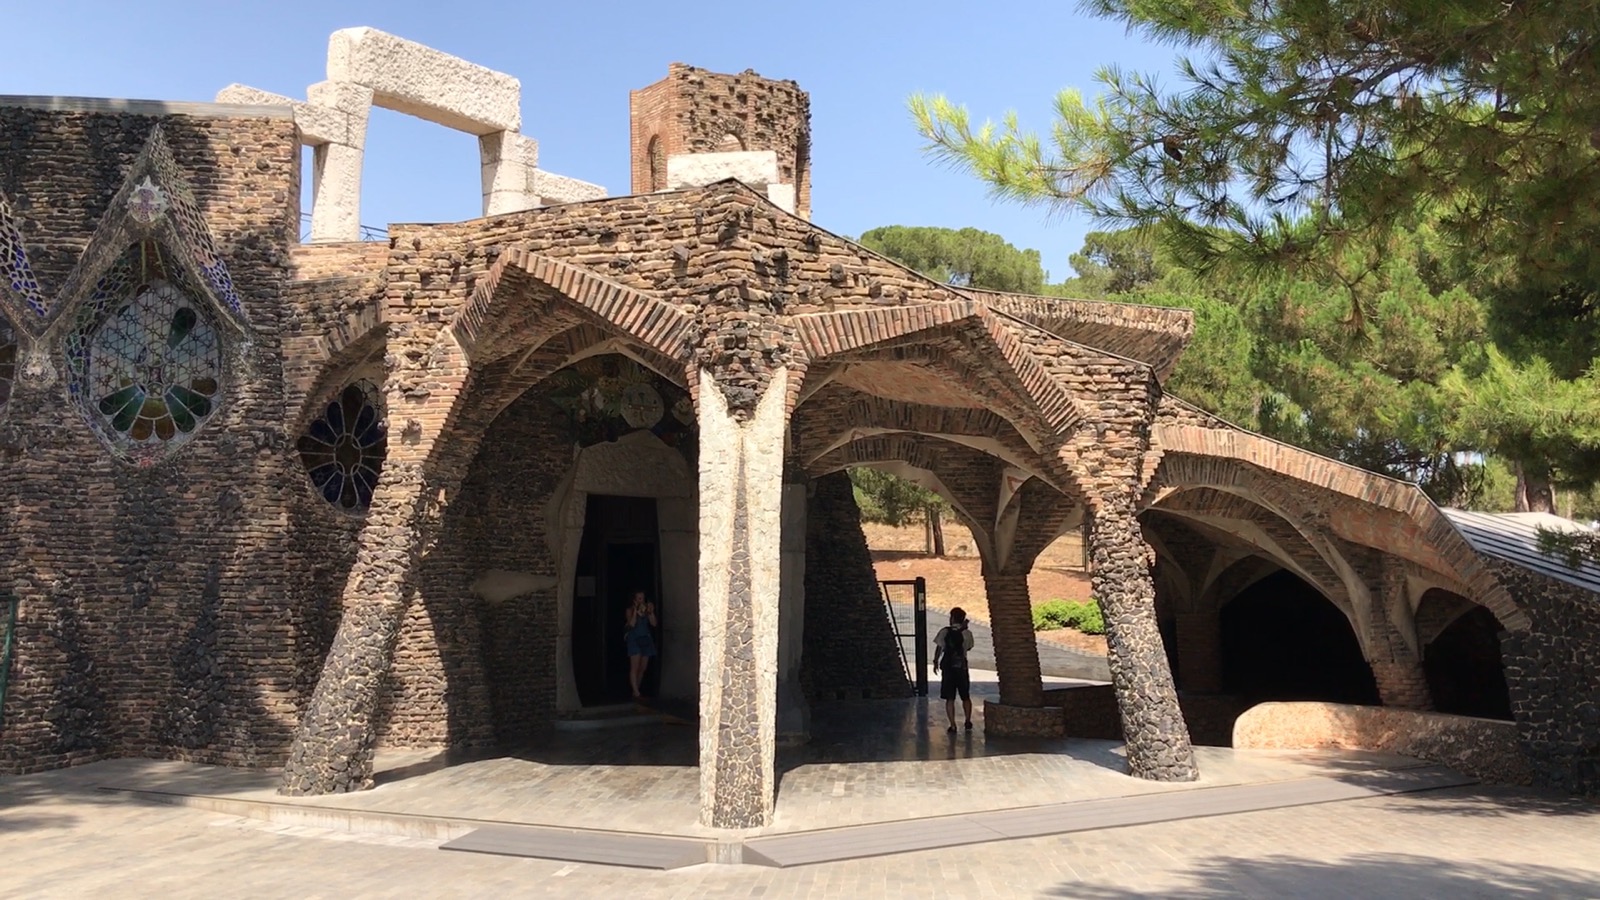 Gaudí's Crypt, which lies in Colònia Güell, just outside Barcelona. (Photo: Alicia Egorov)